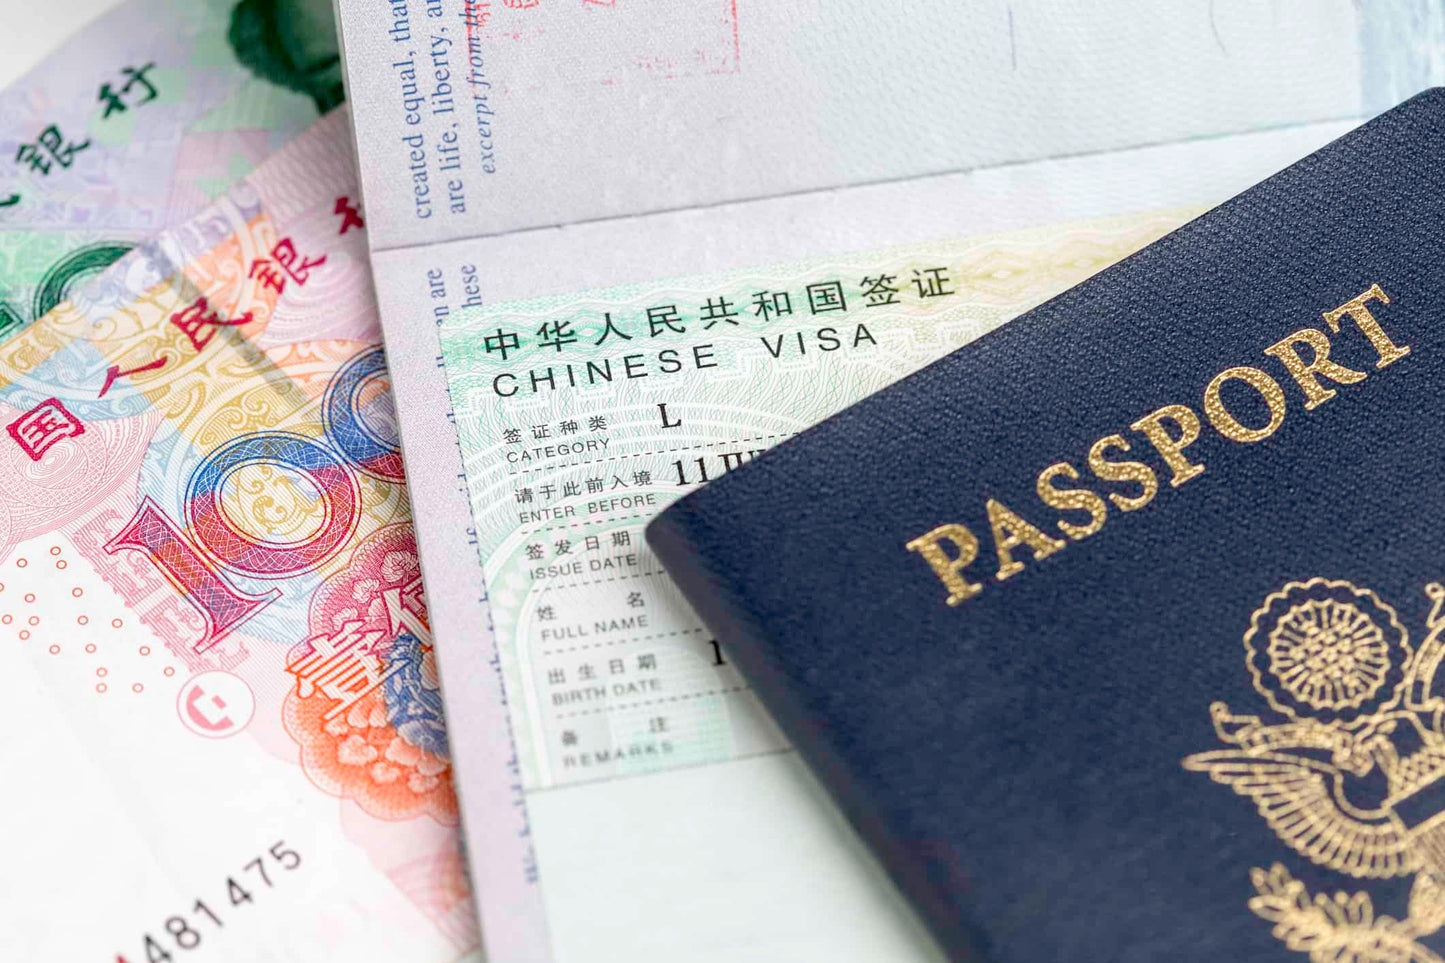 China Q1 Exceed 180 Days Family Visa All Fees Are Included (NY Consular District)